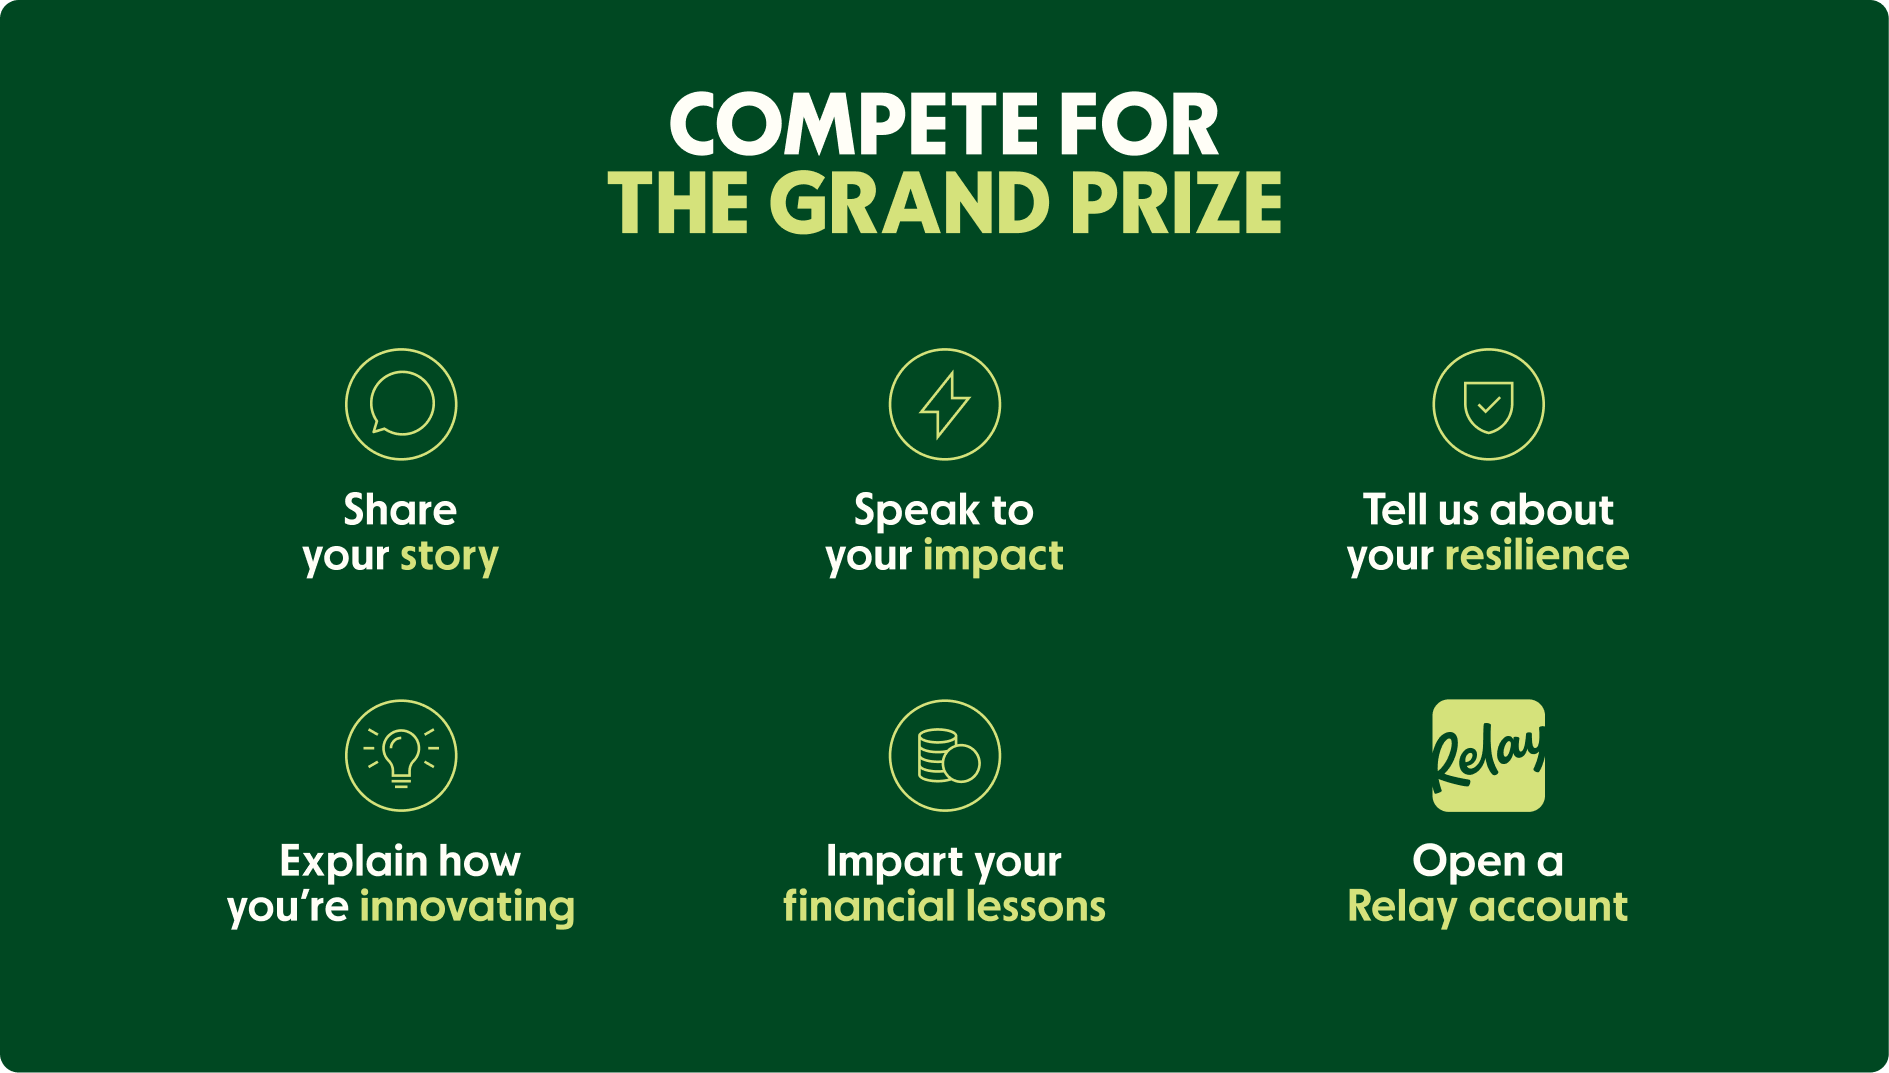 Reasons To Be Profitable Contest - Compete for Grand Prize - Relay